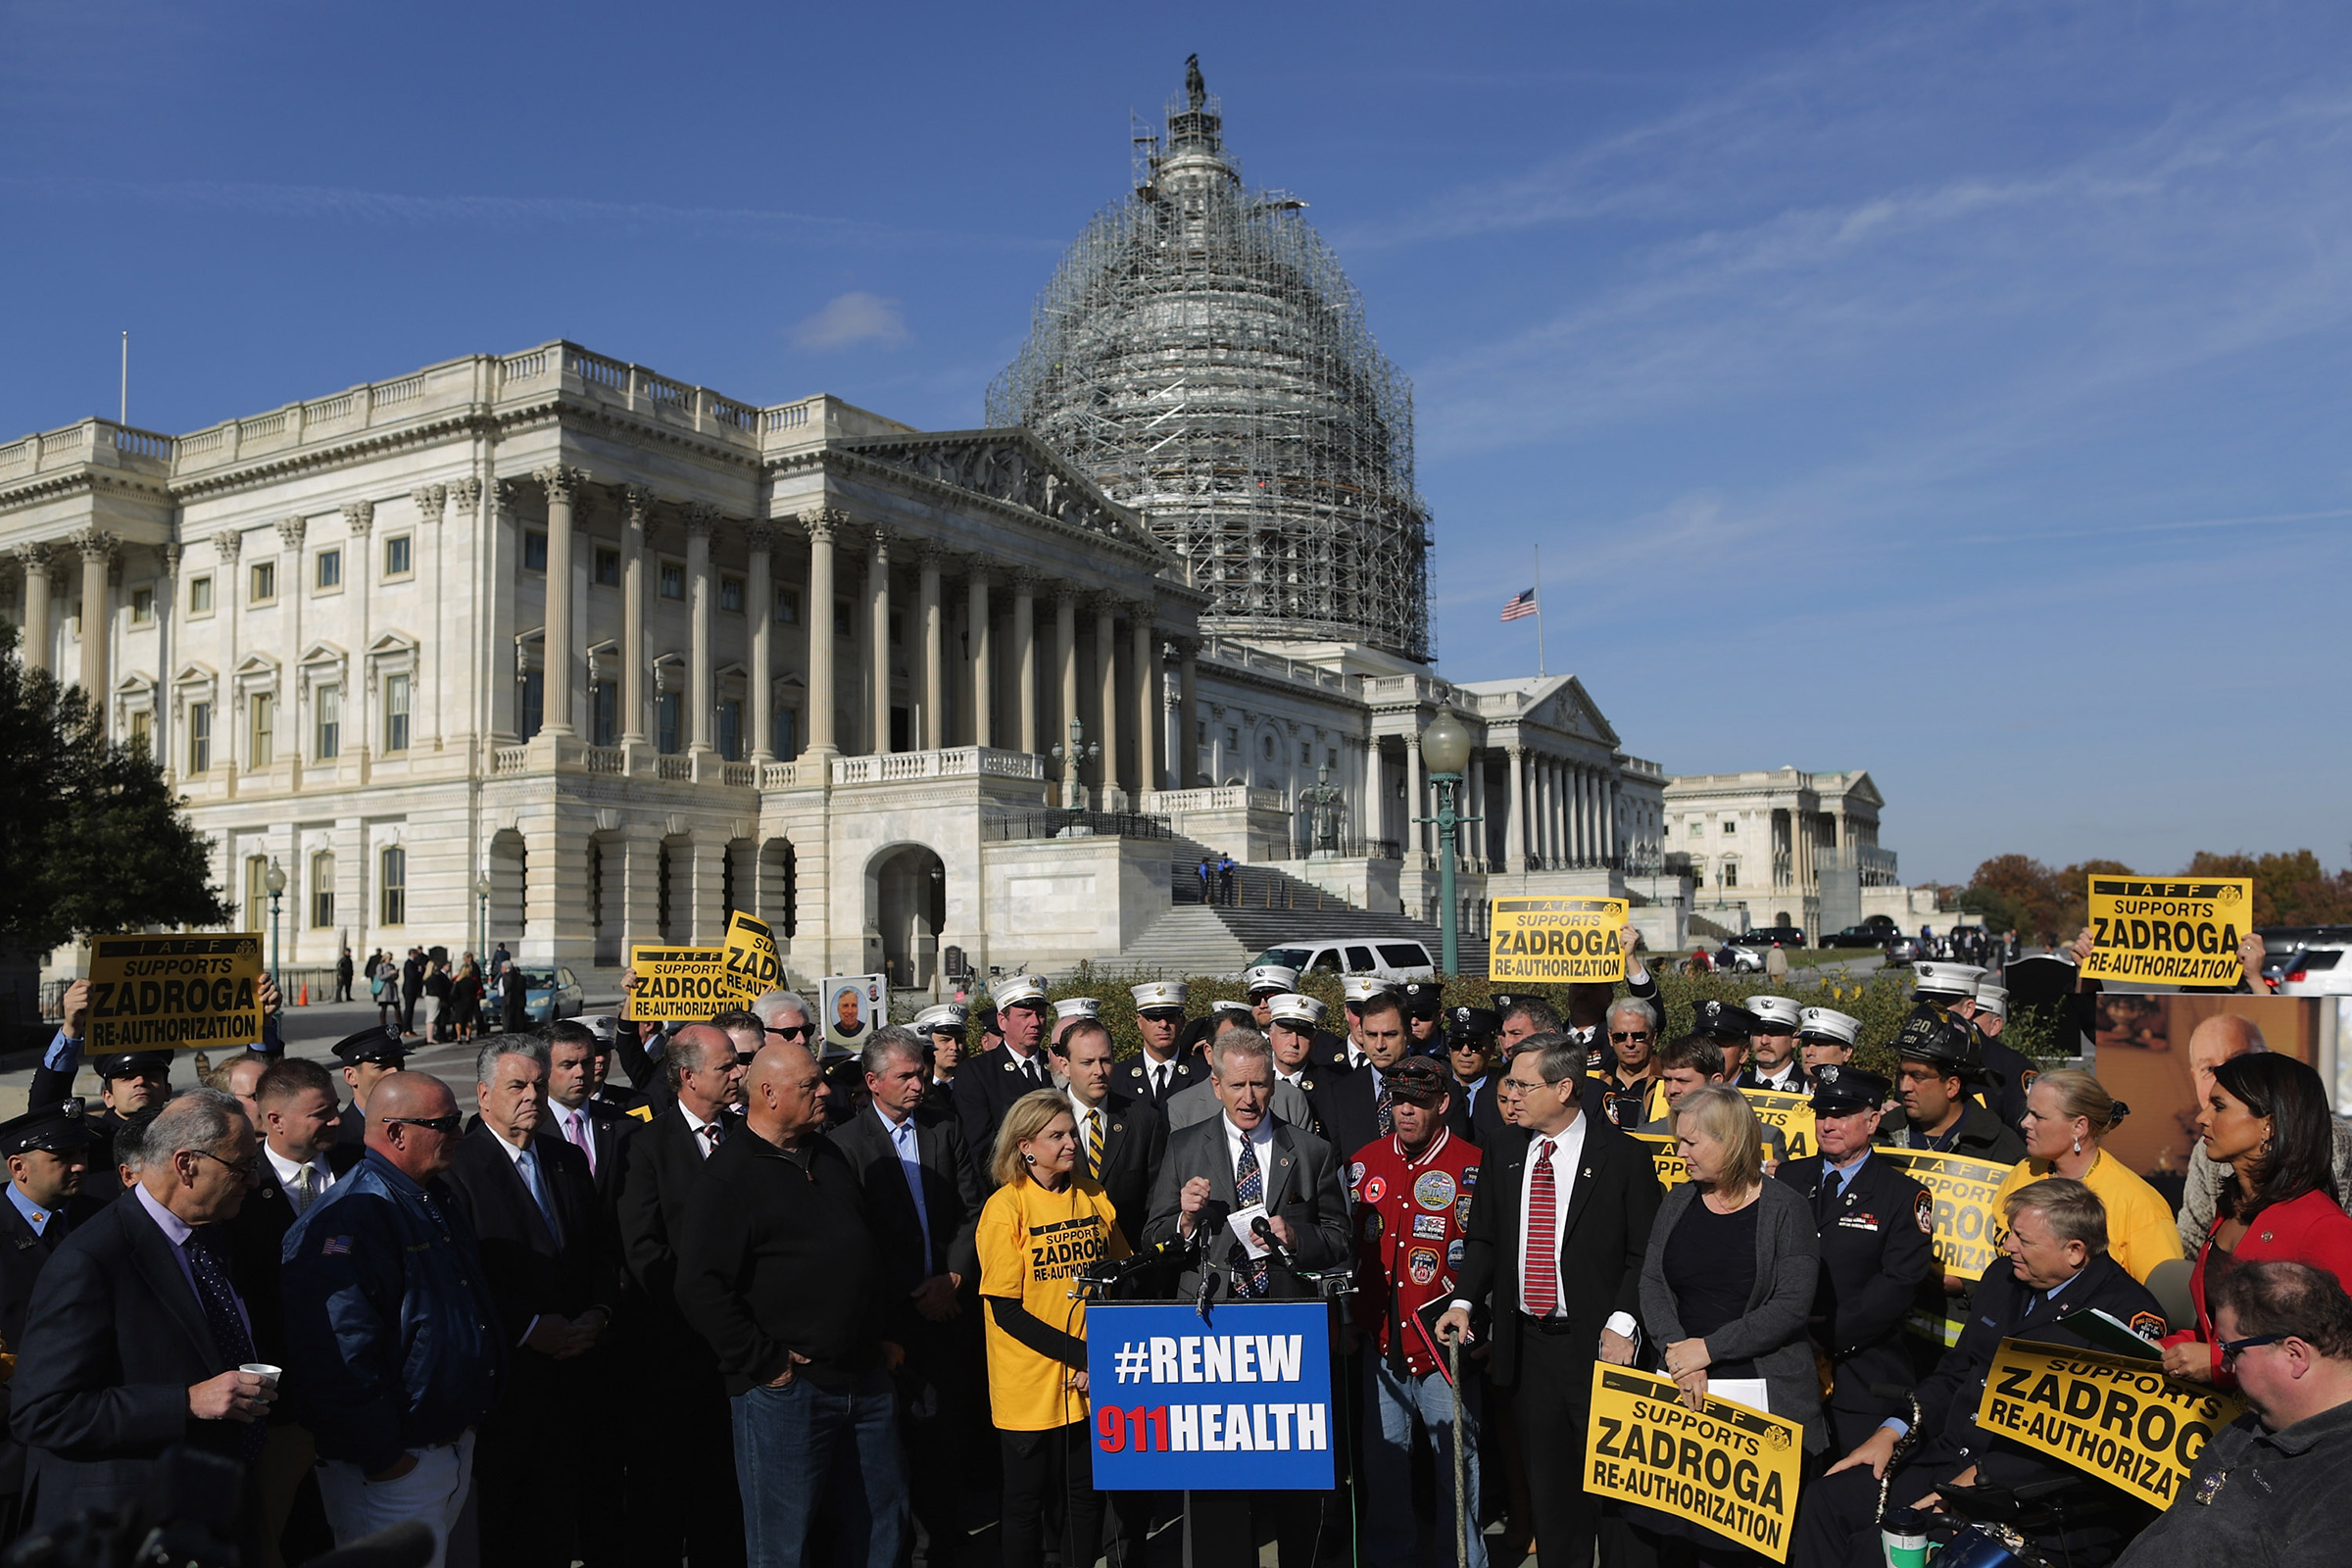 Senate and House Democrats hold a news conference with first responders from New York and members of the Iraq and Afghanistan Veterans of America to announce their support for the permanent reauthorization of the James Zadroga 9/11 Health and Compensation Reauthorization Act outside the U.S. Capitol in Washington, D.C., on Nov. 17, 2015. (Chip Somodevilla—Getty Images)